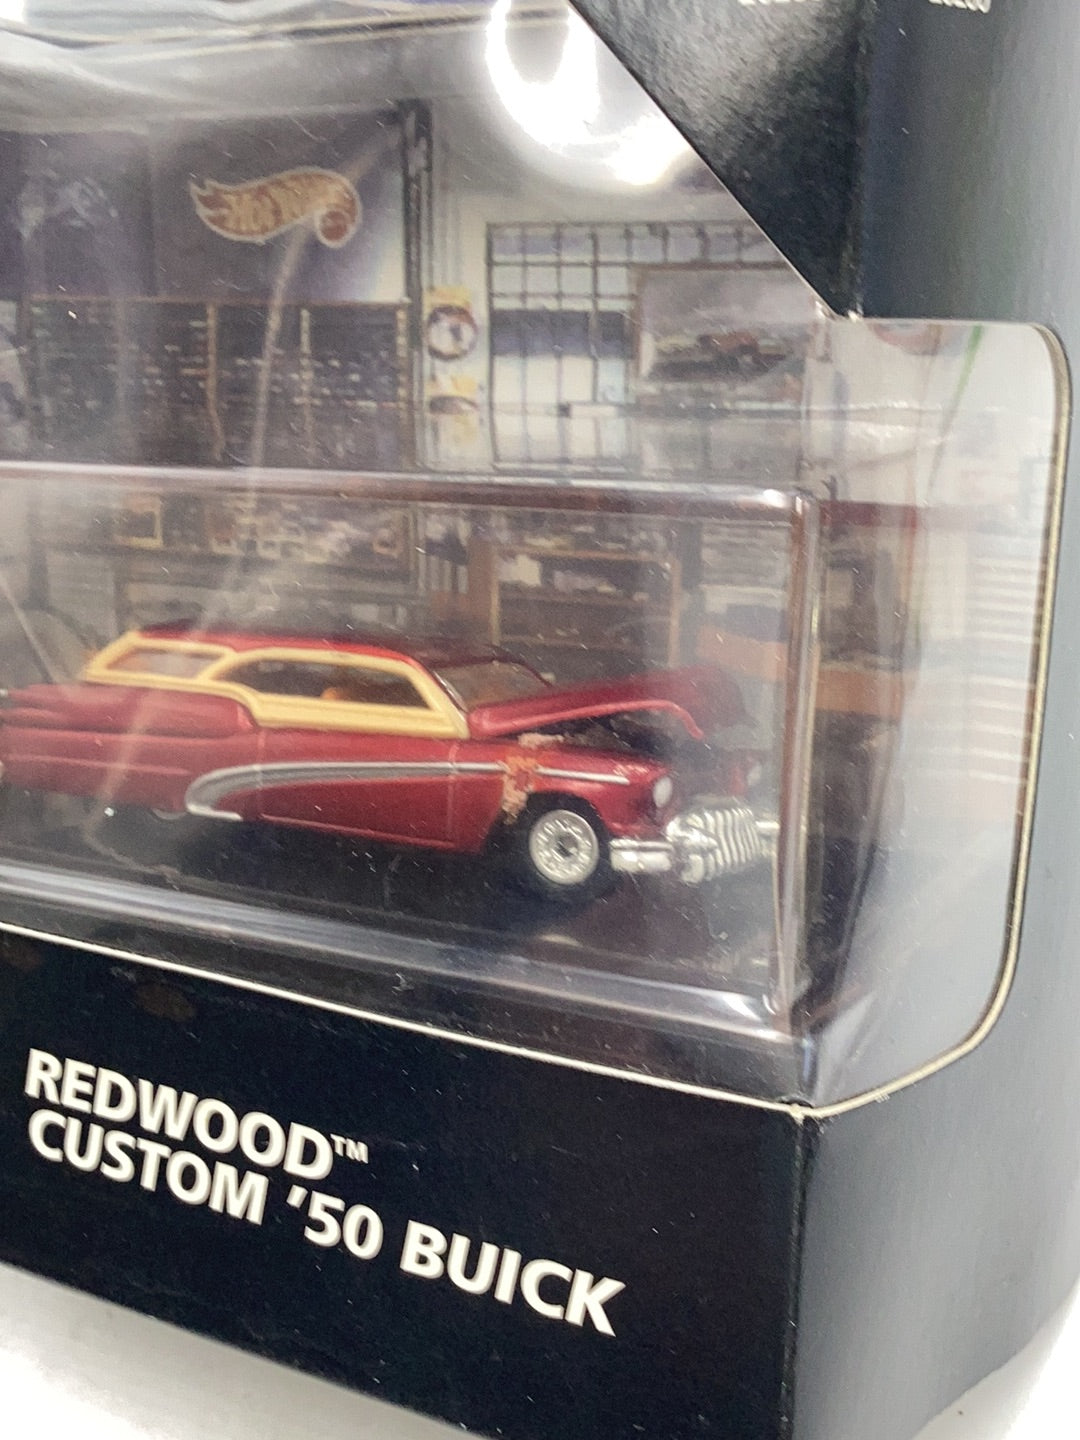 Hot Wheels Collectibles Low #0021 Redwood Custom 50 Buick